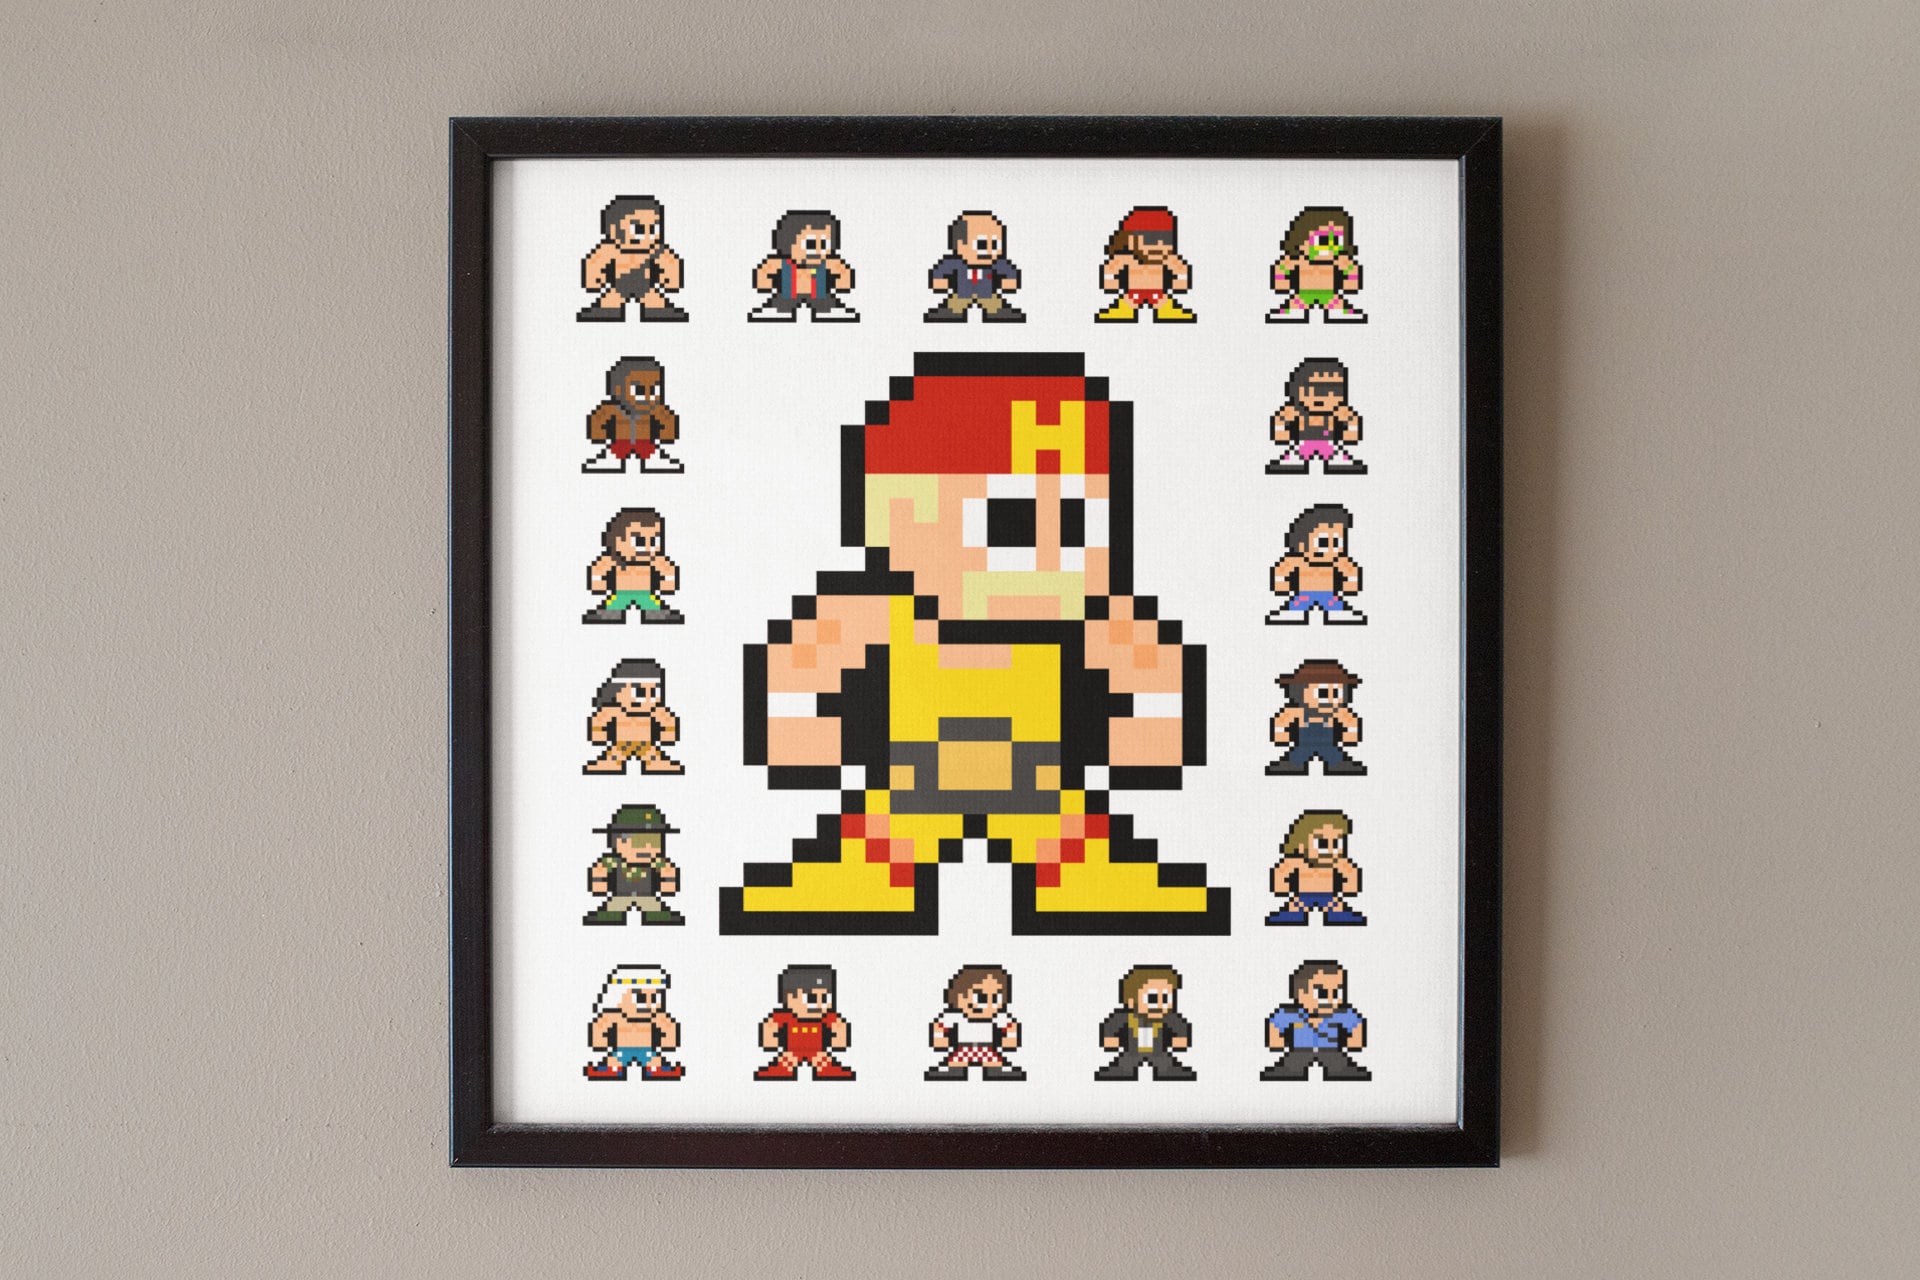 Pin by Chara Girl on The Legend of Zelda  Pixel art characters, Pixel art, Link  pixel art